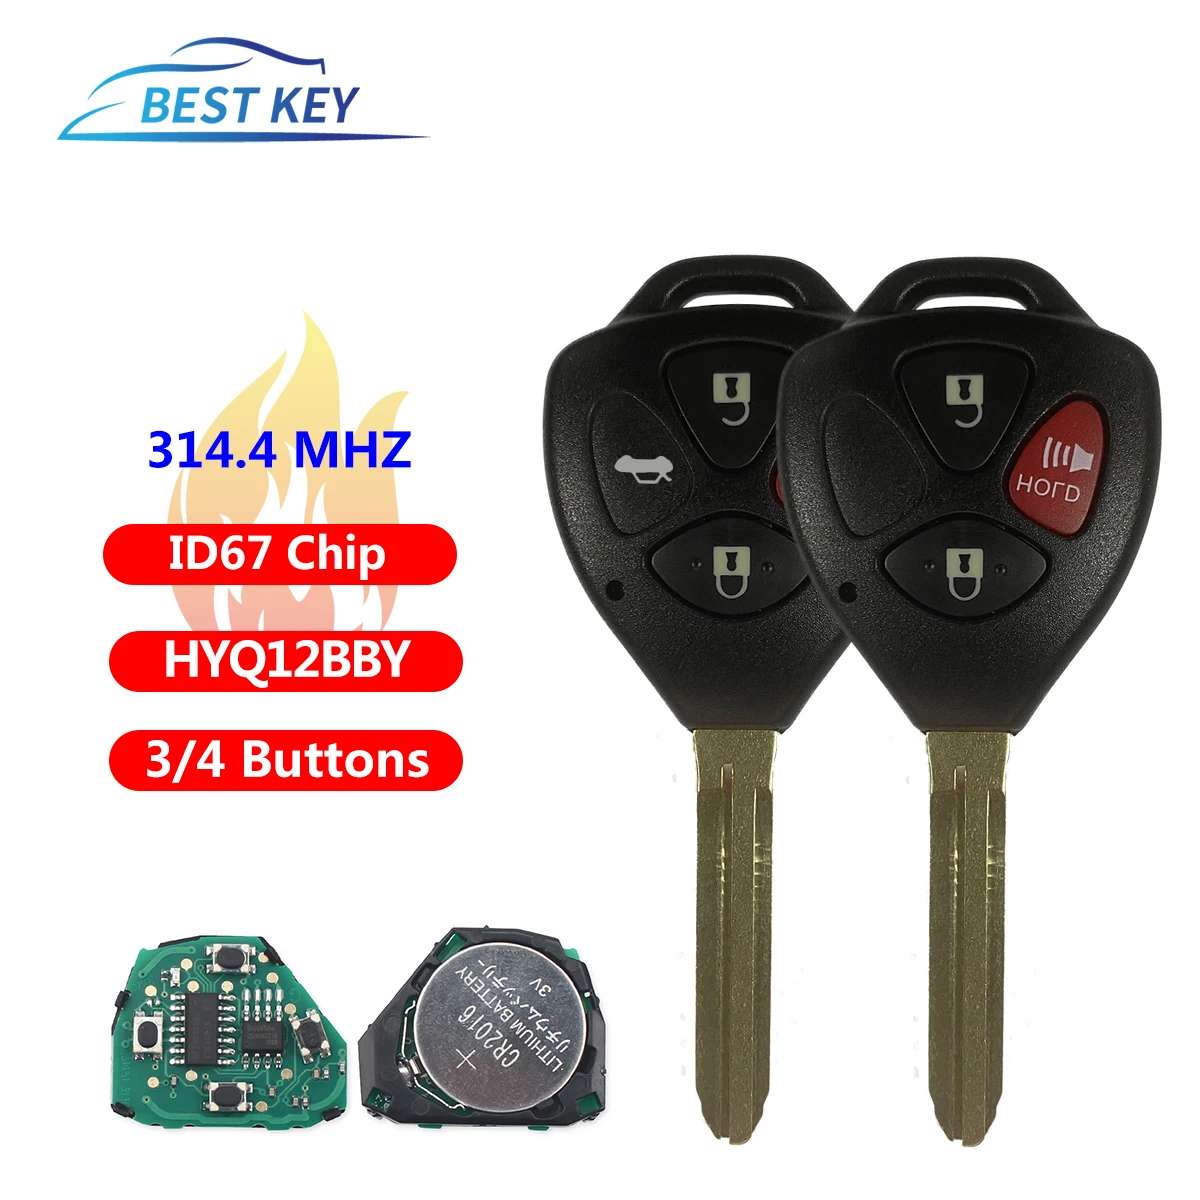 

BEST KEY Smart Remote Car Key Fob 314.4Mhz HYQ12BBY ID67 Chip 3 Buttons For Toyota RAV4/Hilux/Camry Car Auto Remote Contol Key